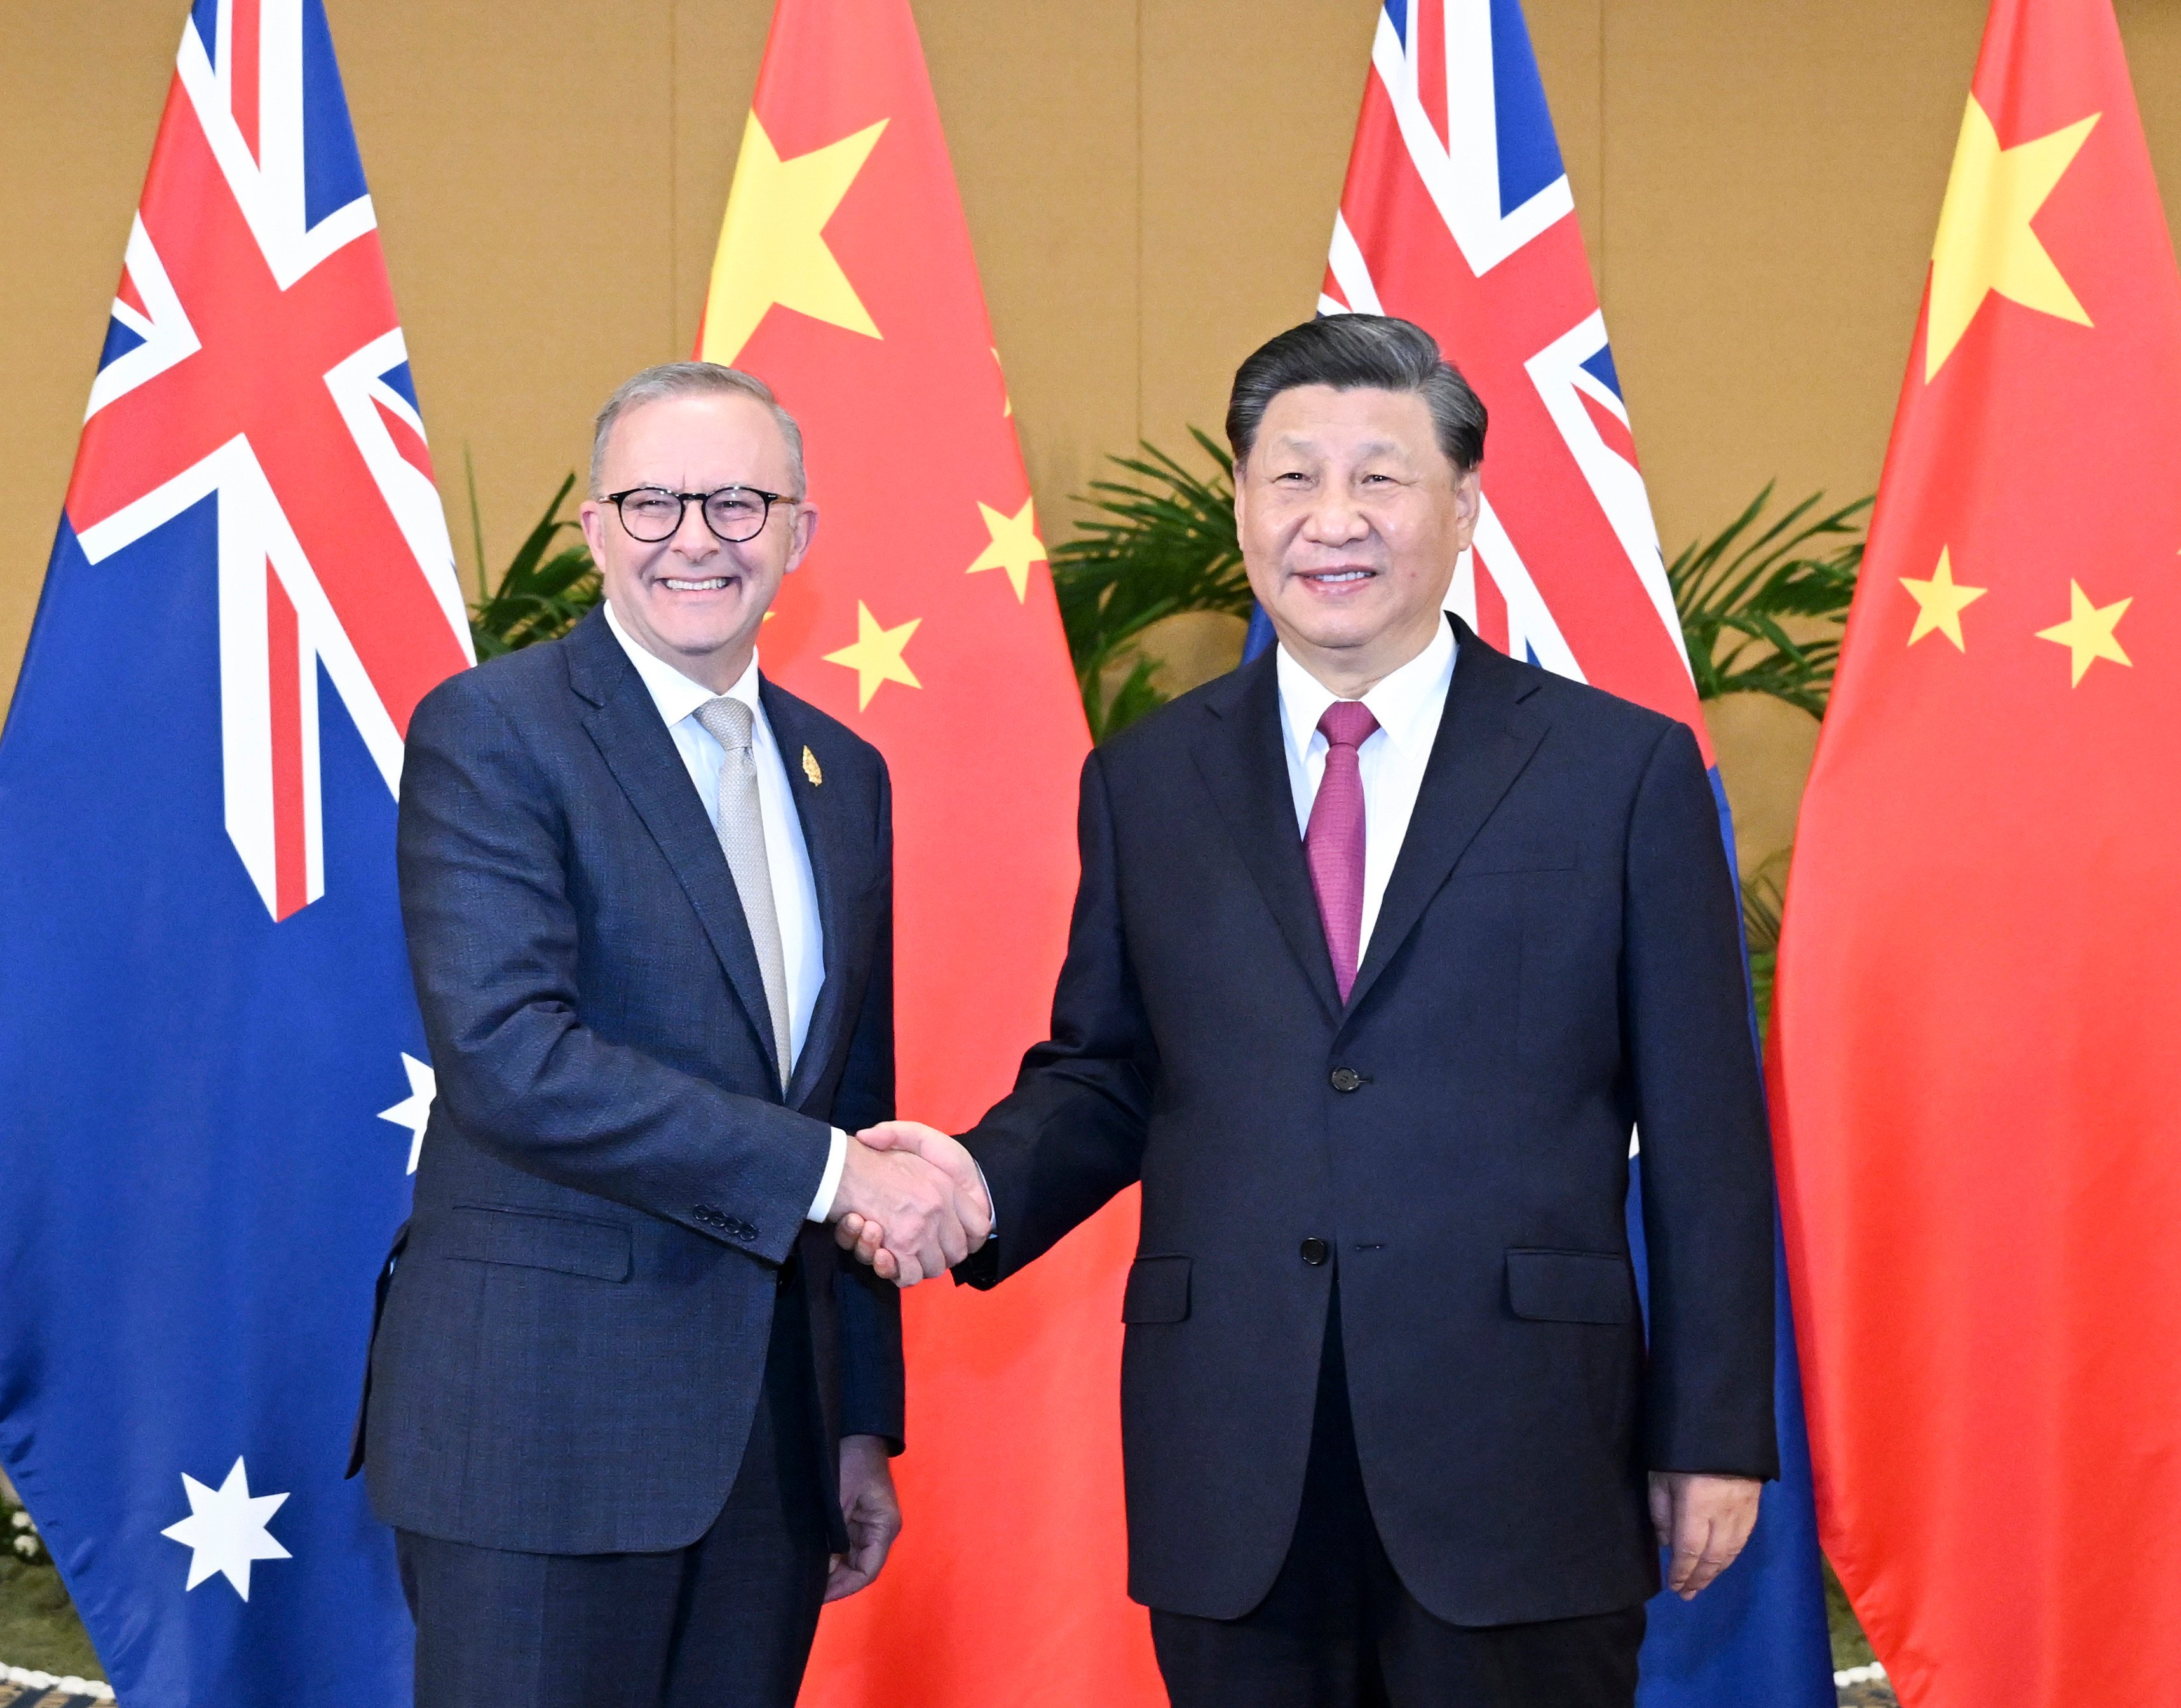 Australian Prime Minister Anthony Albanese meets Chinese President Xi Jinping on the sidelines of the G20 summit in Bali, Indonesia, on November 15, 2022. Photo: Xinhua